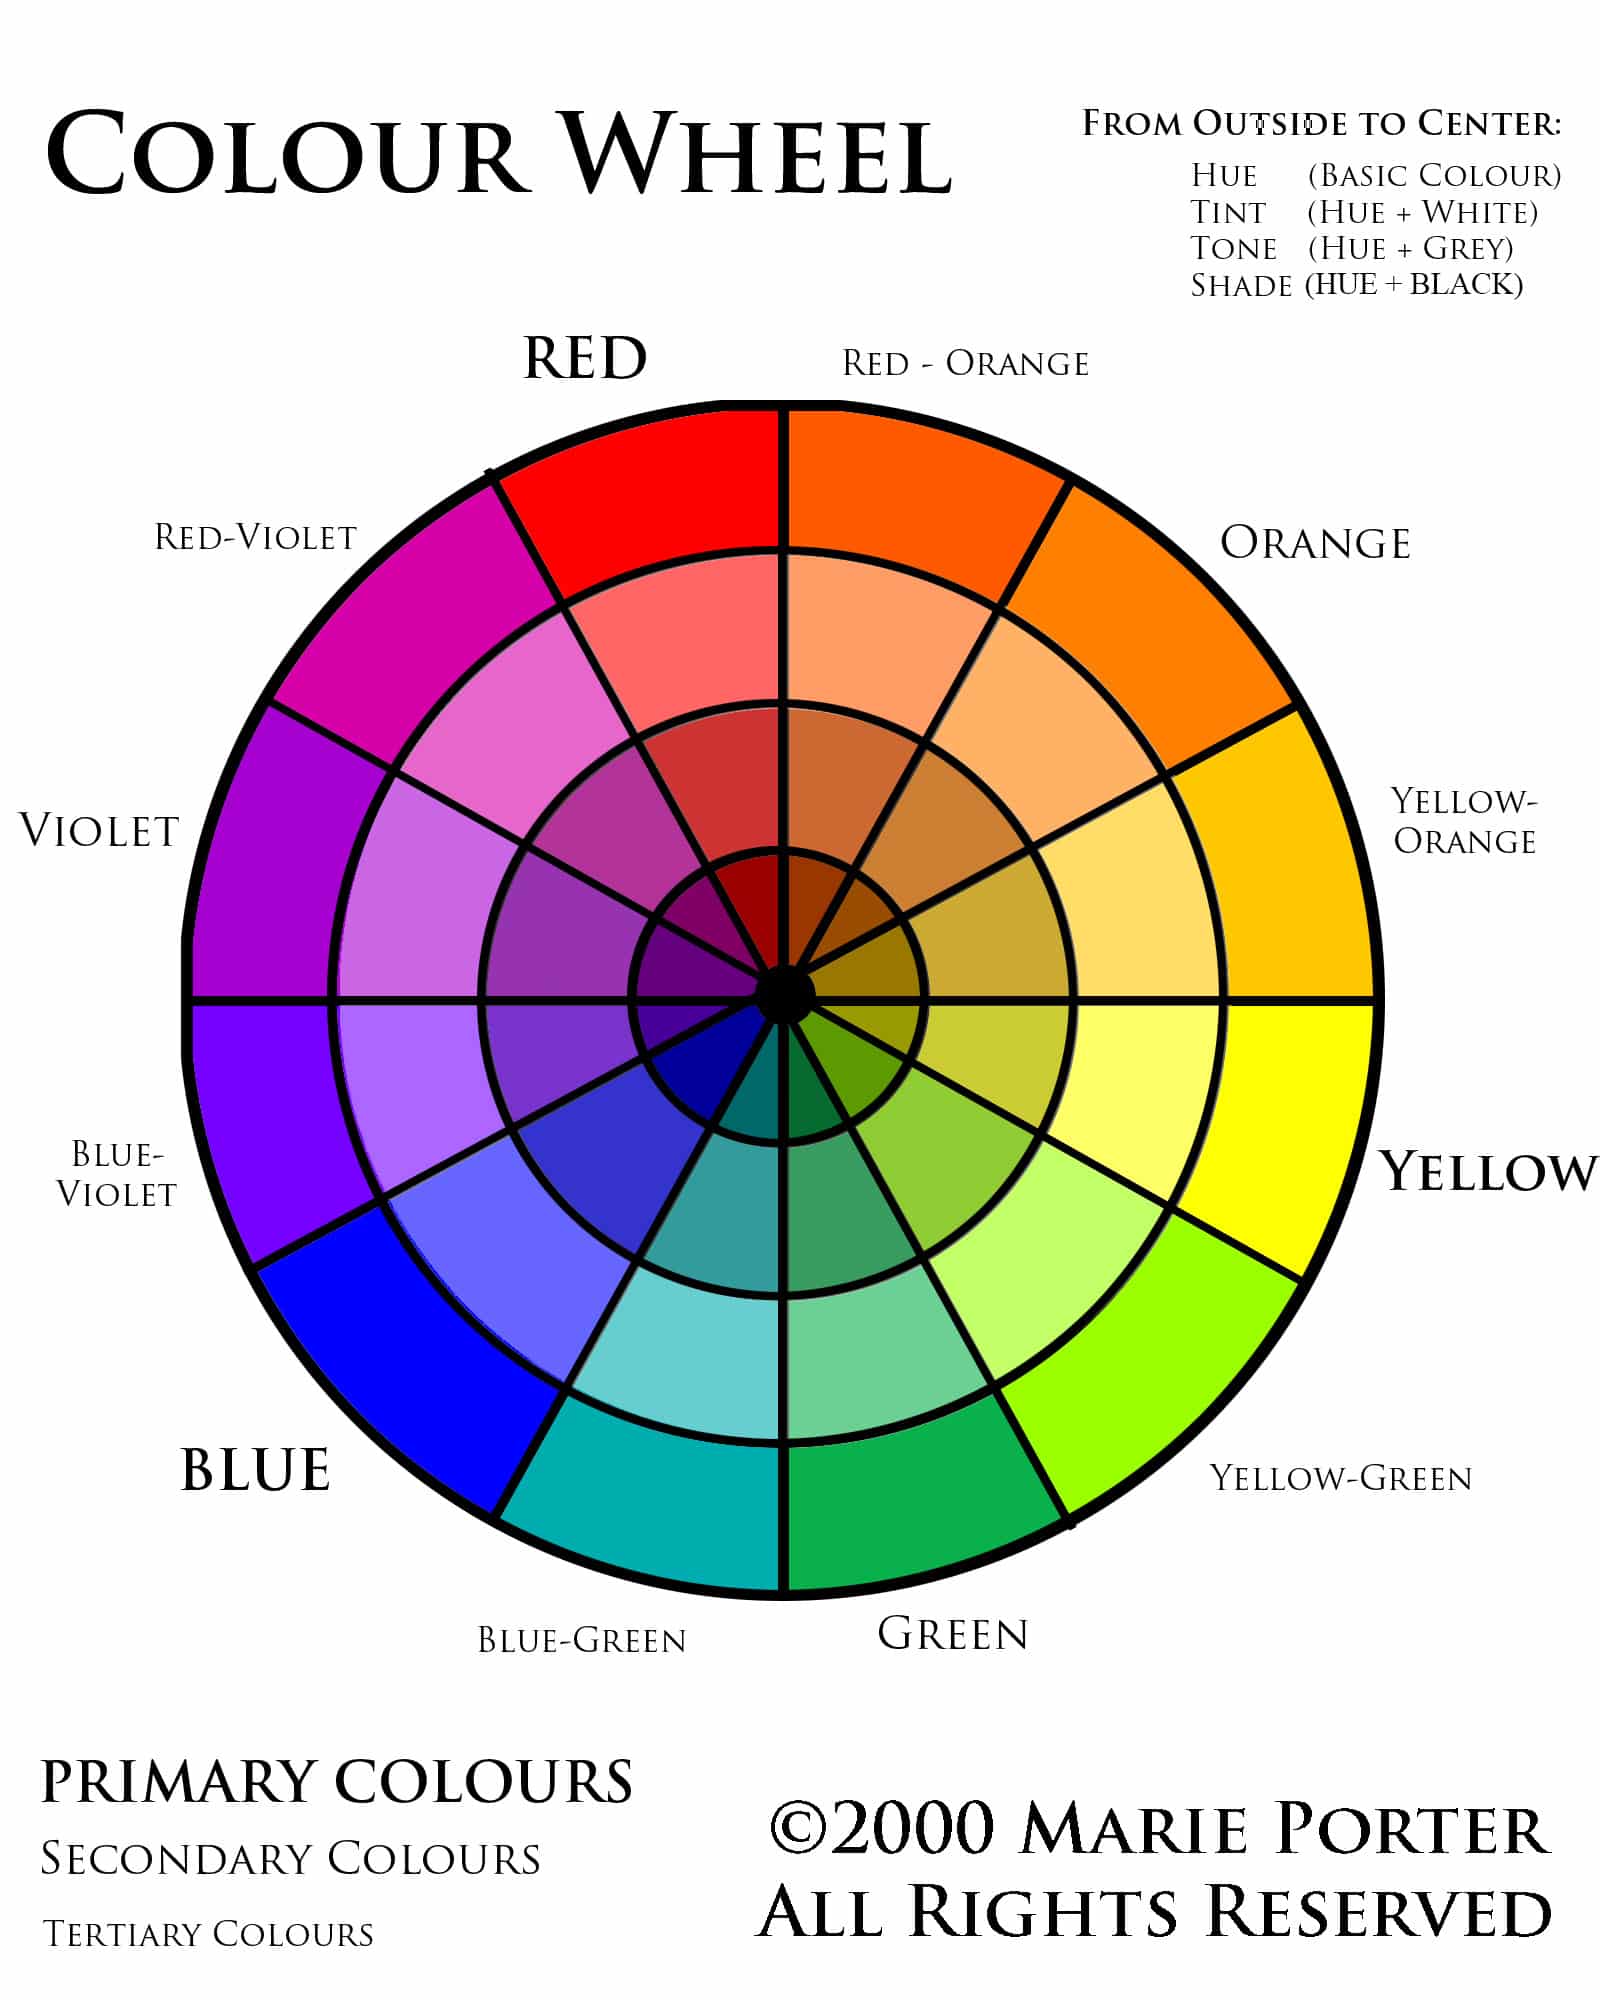 Image depicts a colour wheel - a circle divided into many colours, showing primary, secondary, and tertiary colours, as well as tints, shades, and tones of those colours. This is to help with colour theory for spandex costuming.